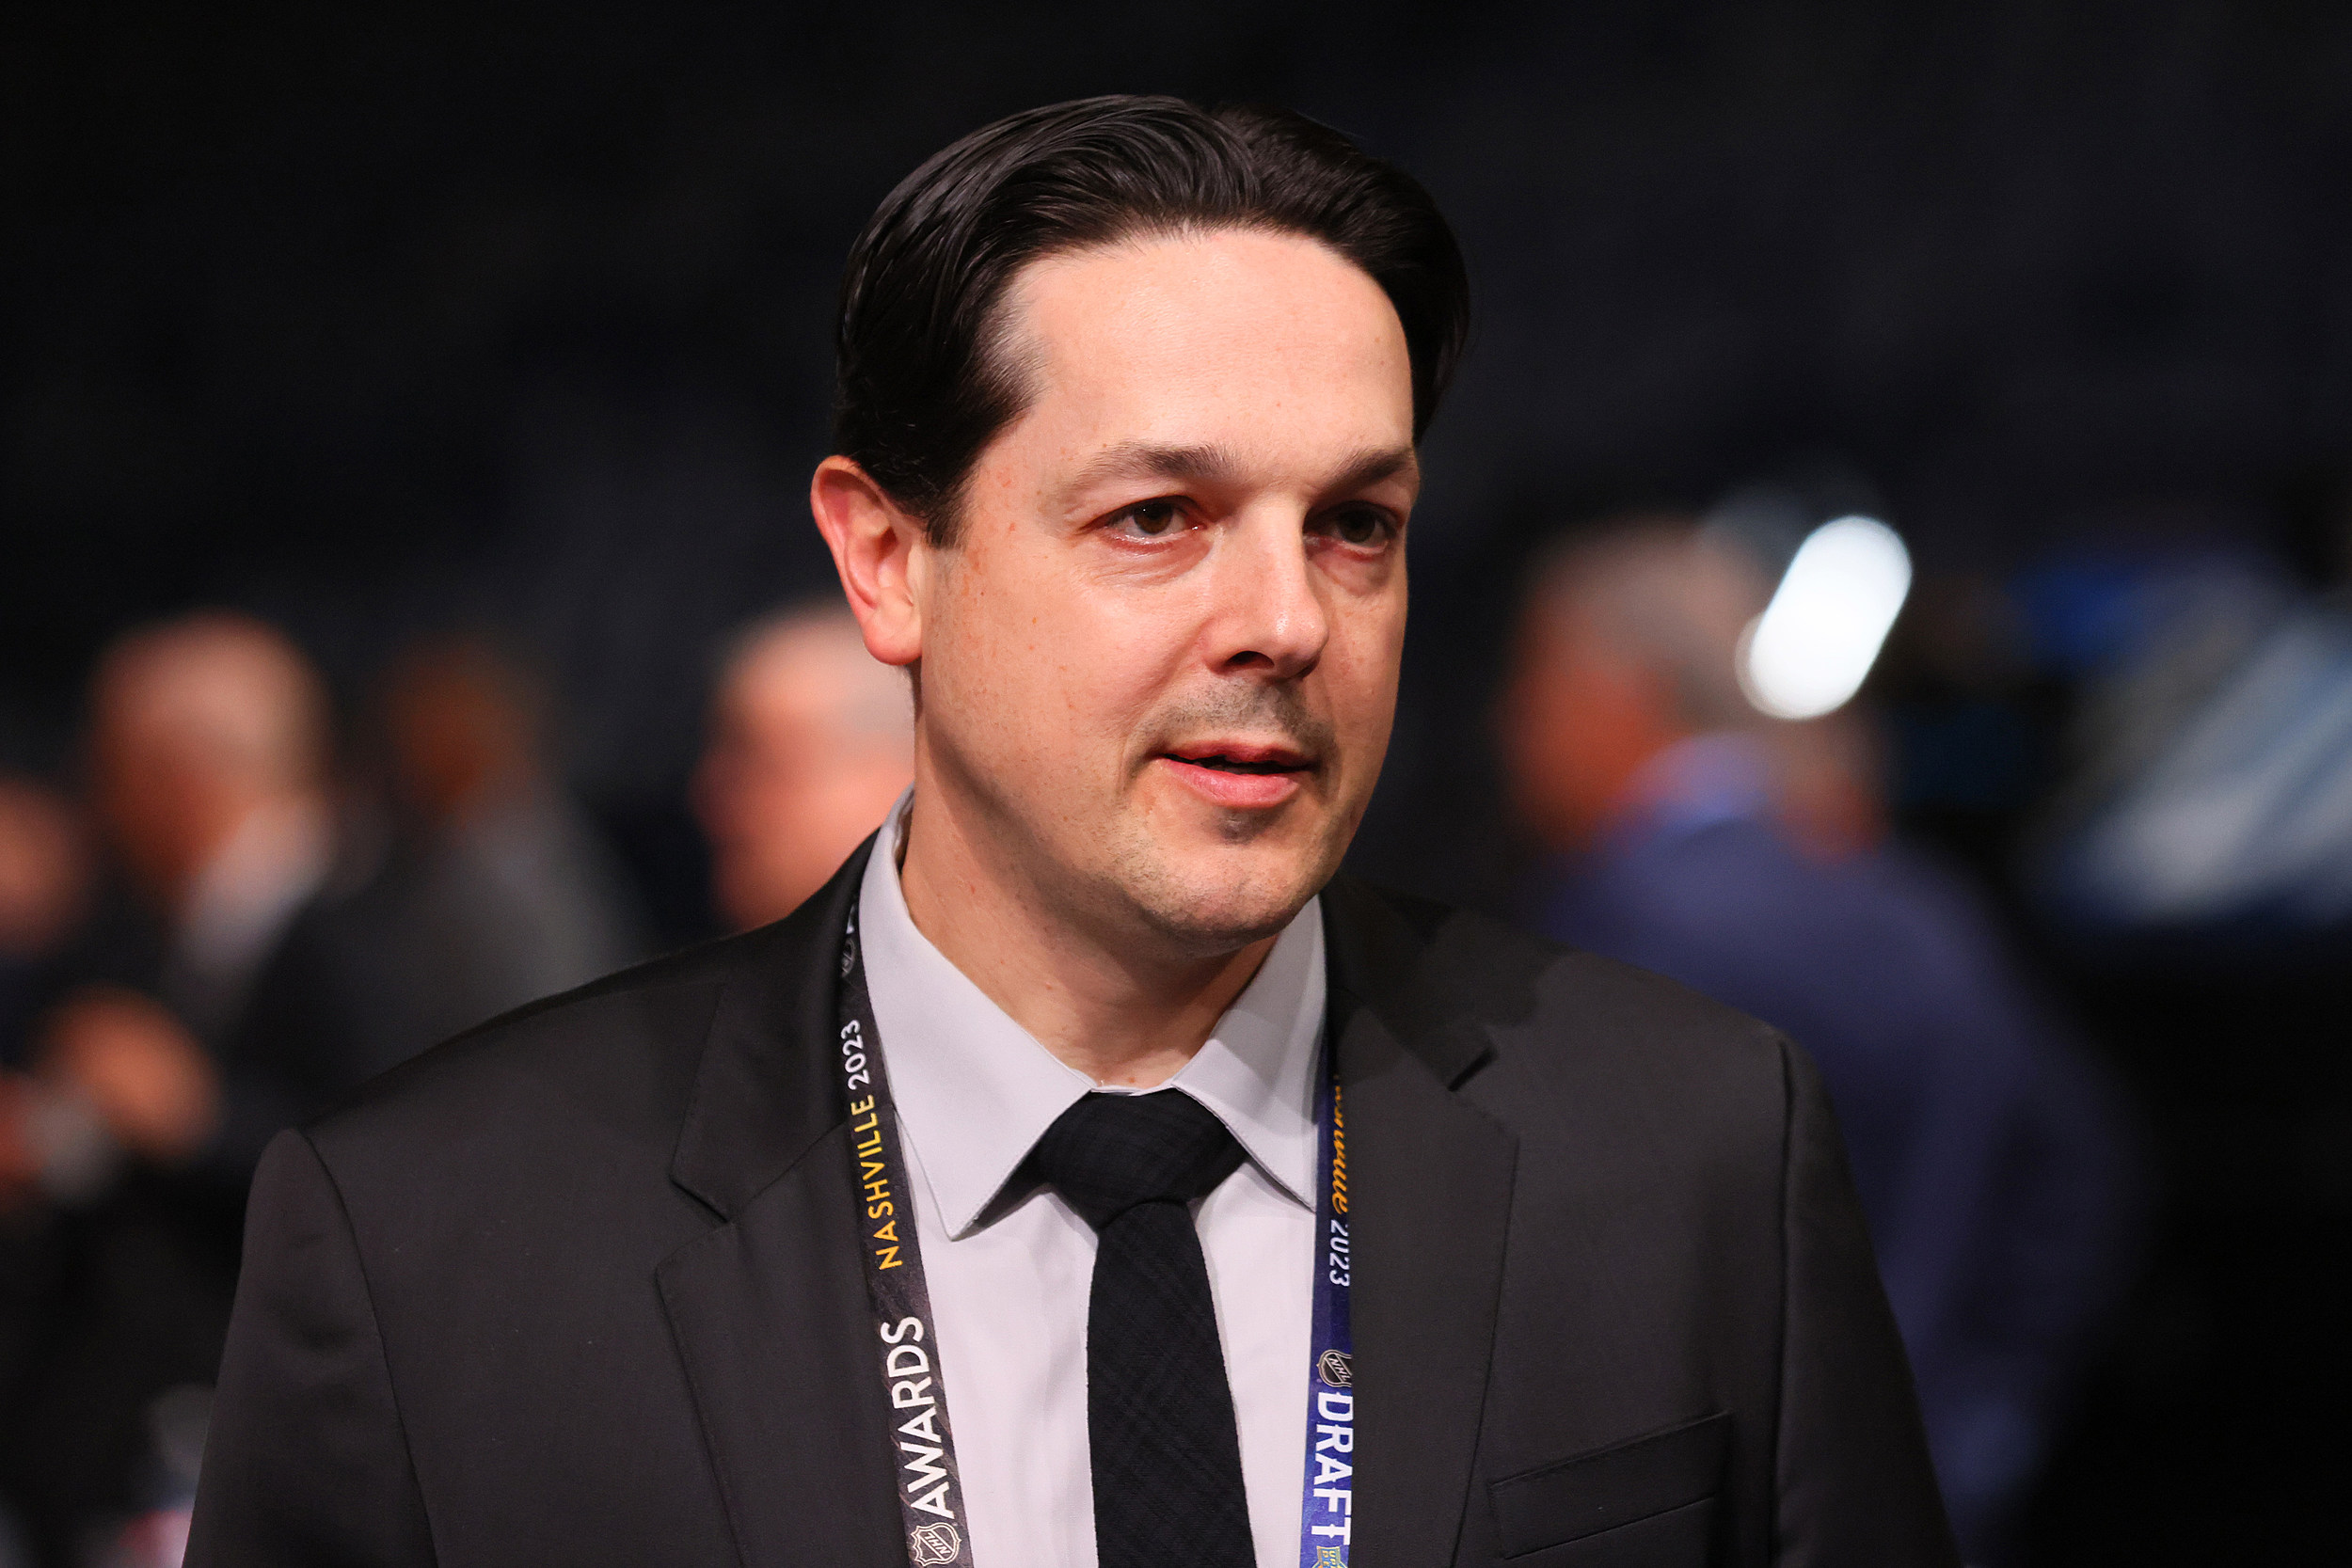 Family first' for former Flyer Briere in retirement – The Mercury